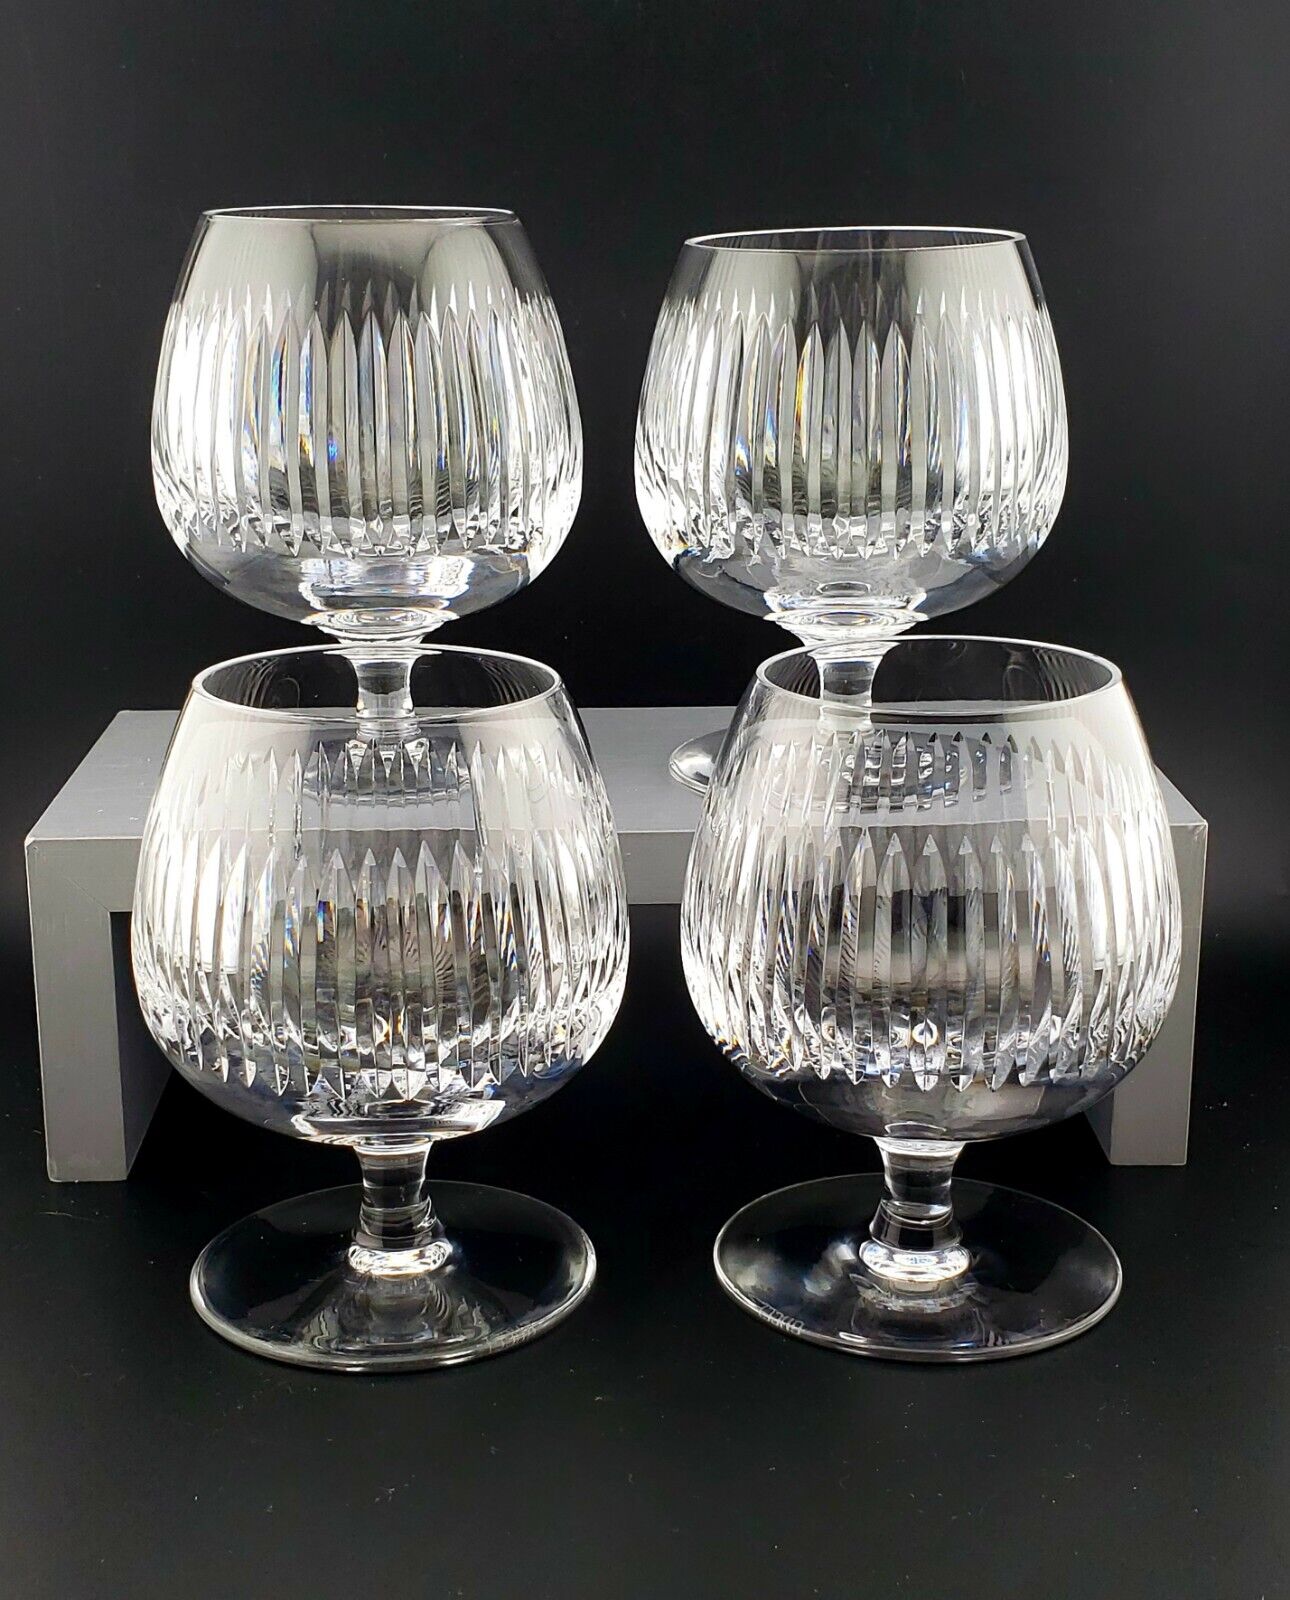 Gucci Crystal Set Of 4 Brandy Snifters Glasses Vertical Cut Design Etched Signed